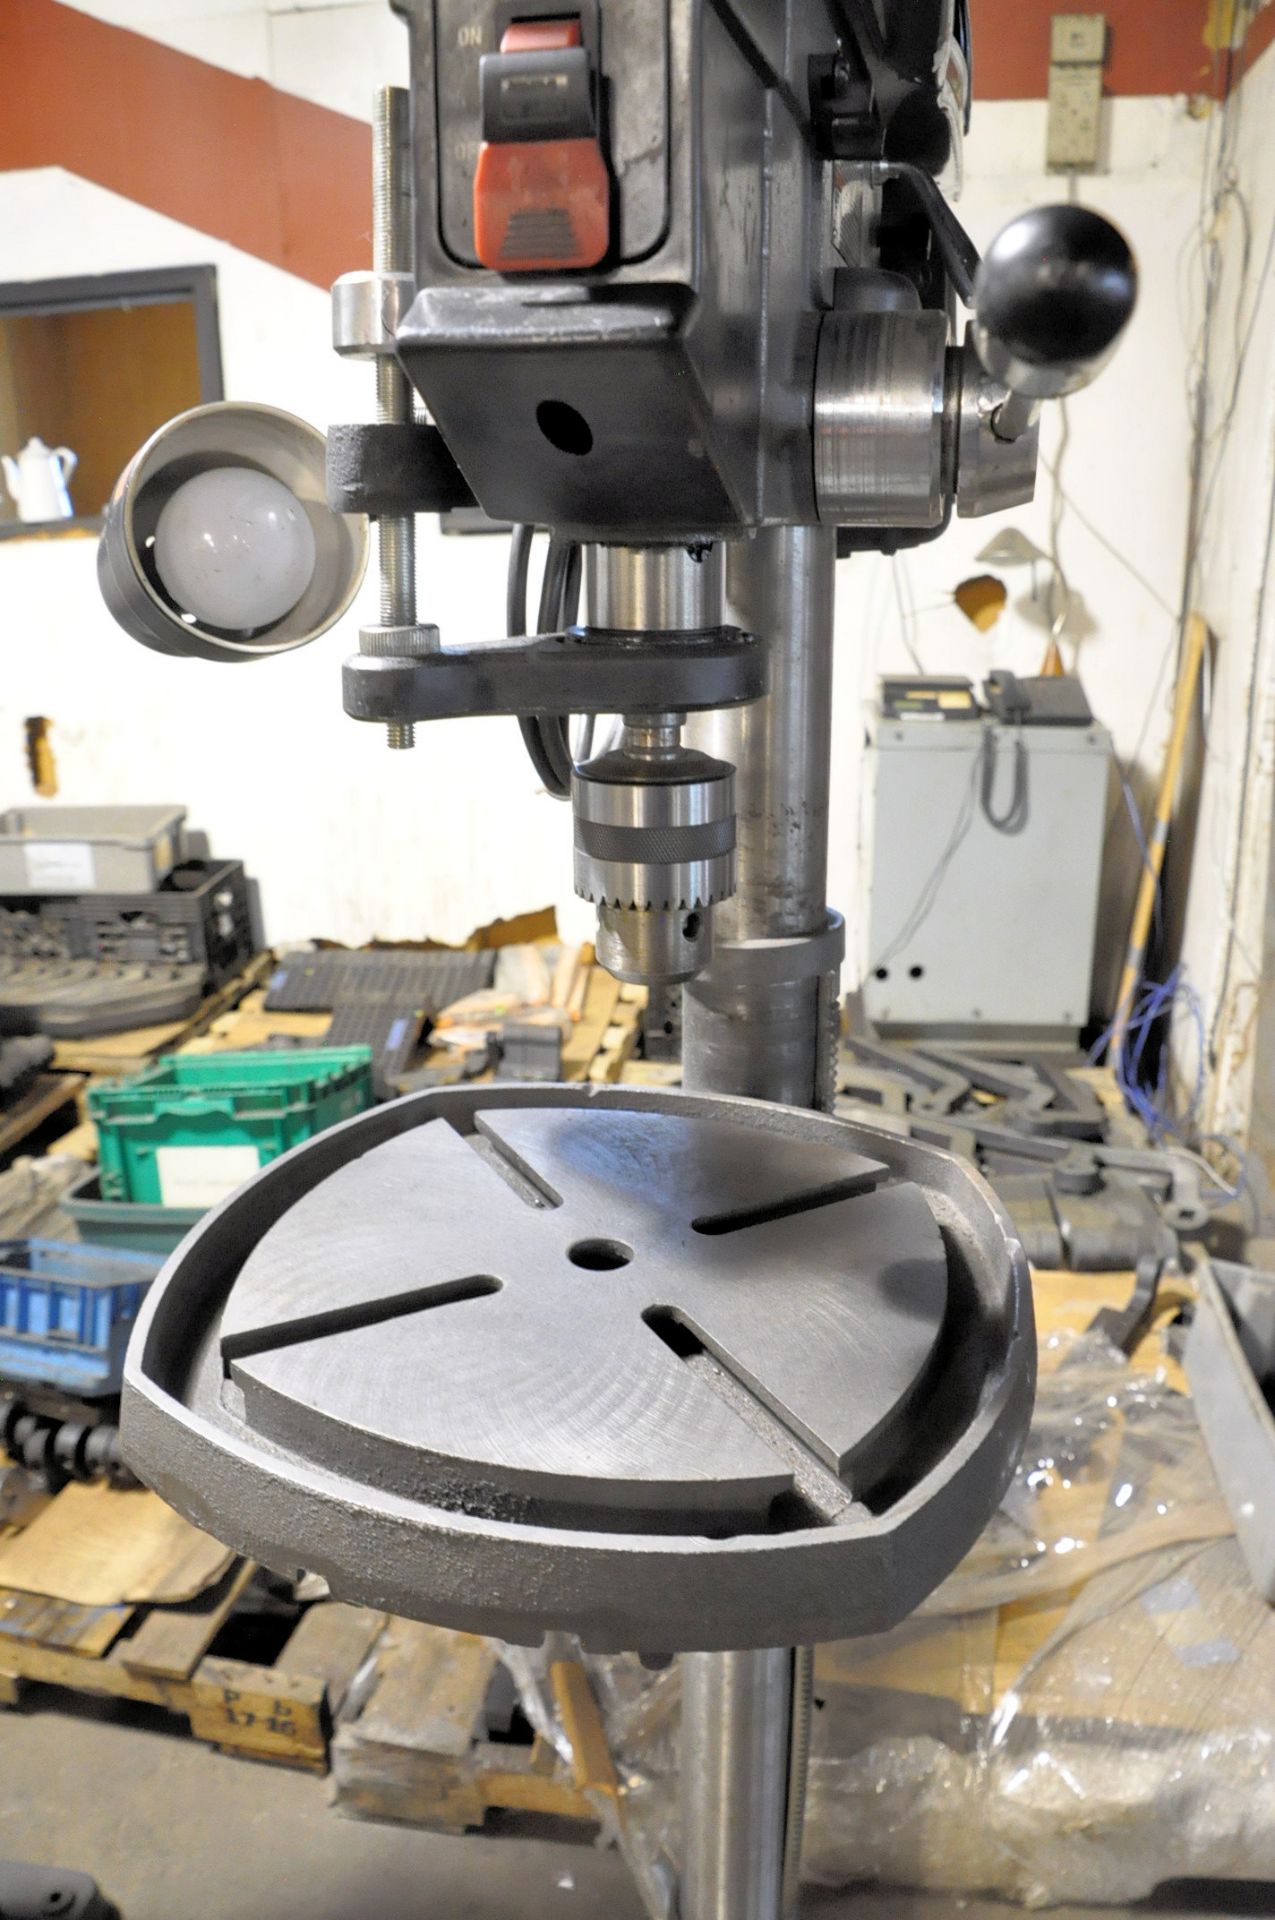 Porter Cable 15" Floor Standing Variable Speed Drill Press,16mm Chuck, (Bldg 2) - Image 3 of 3